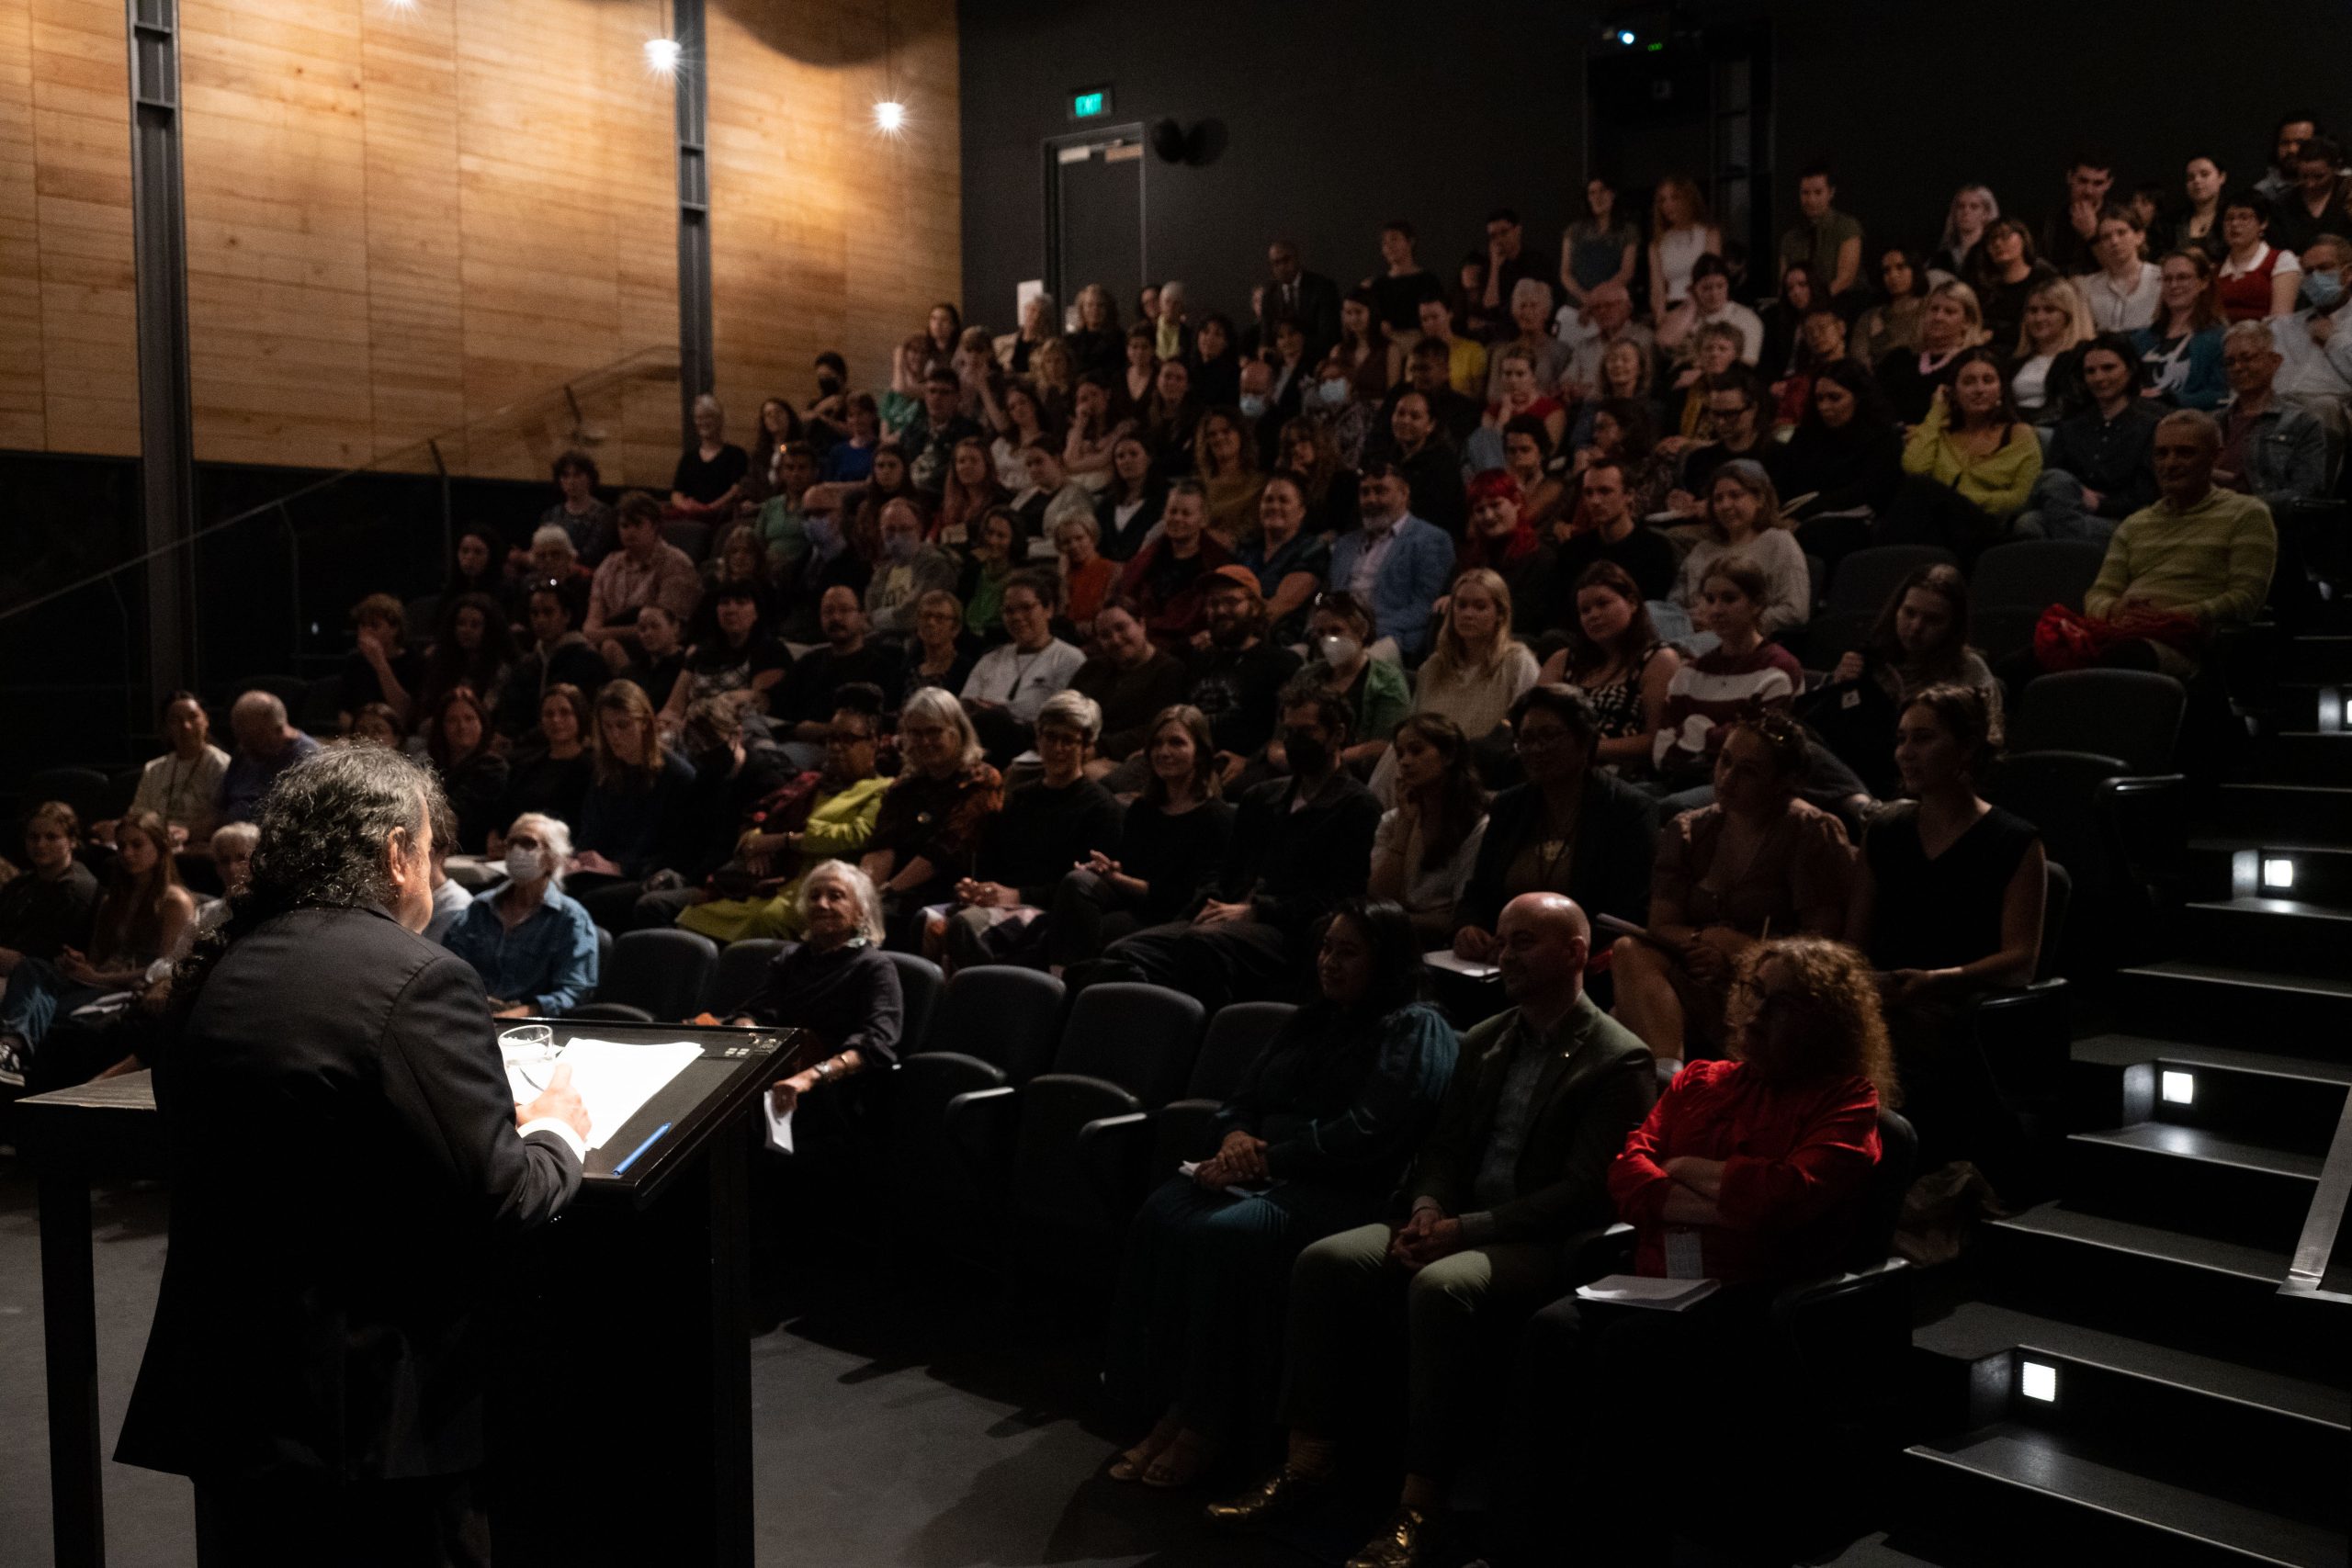 That afternoon, Smith leads a public talk followed by a question and answer session at City Gallery Te Whare Toi.